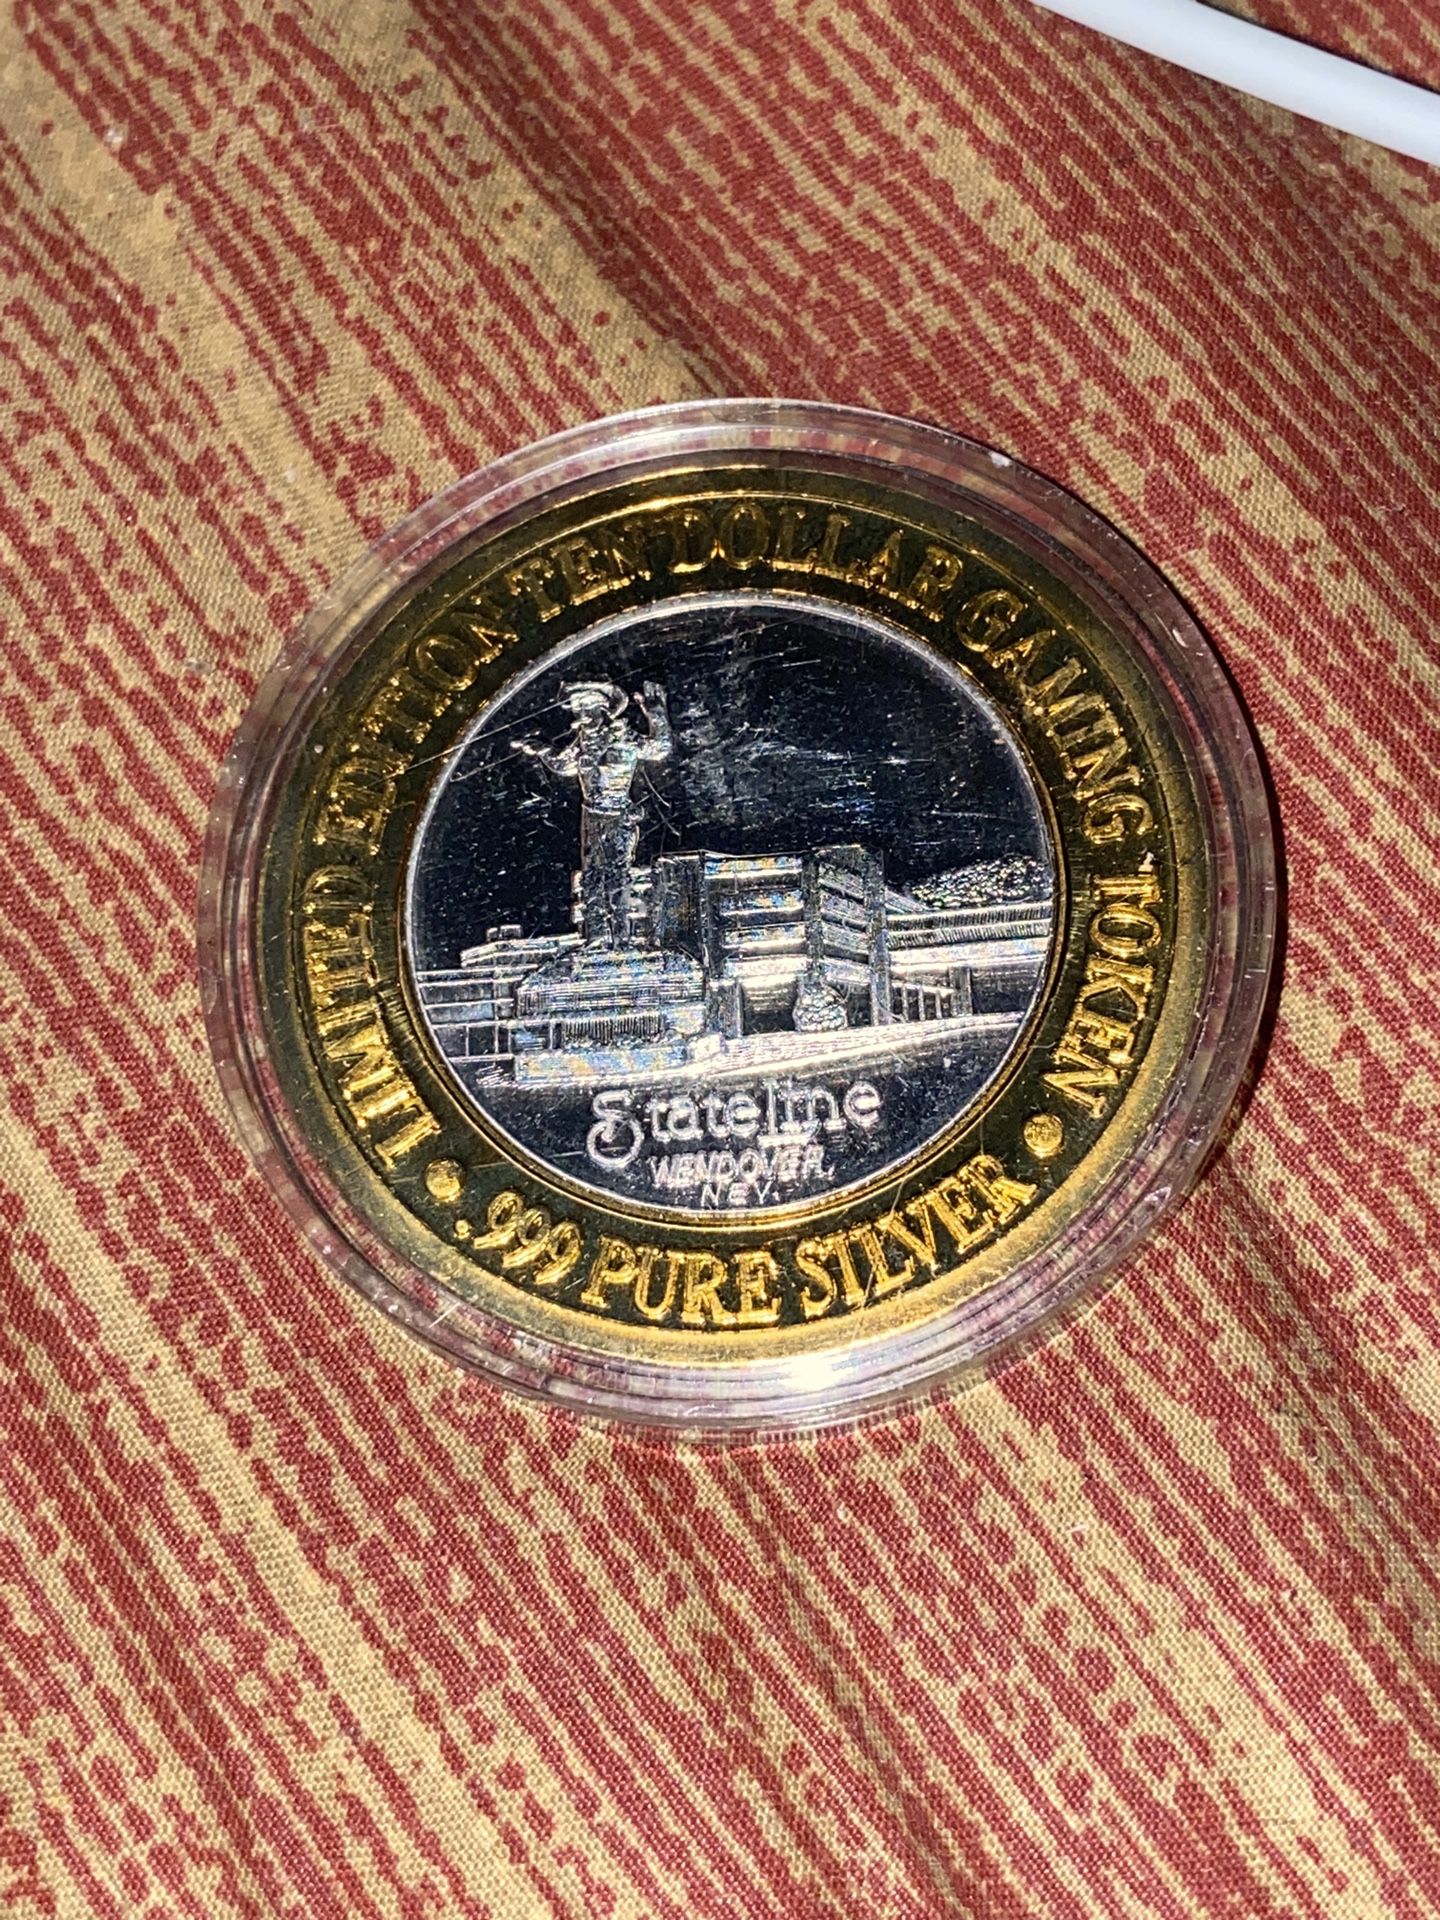 Limited Edition Ten Dollar Gaming Token - .999 Fine Silver - State Line Casino